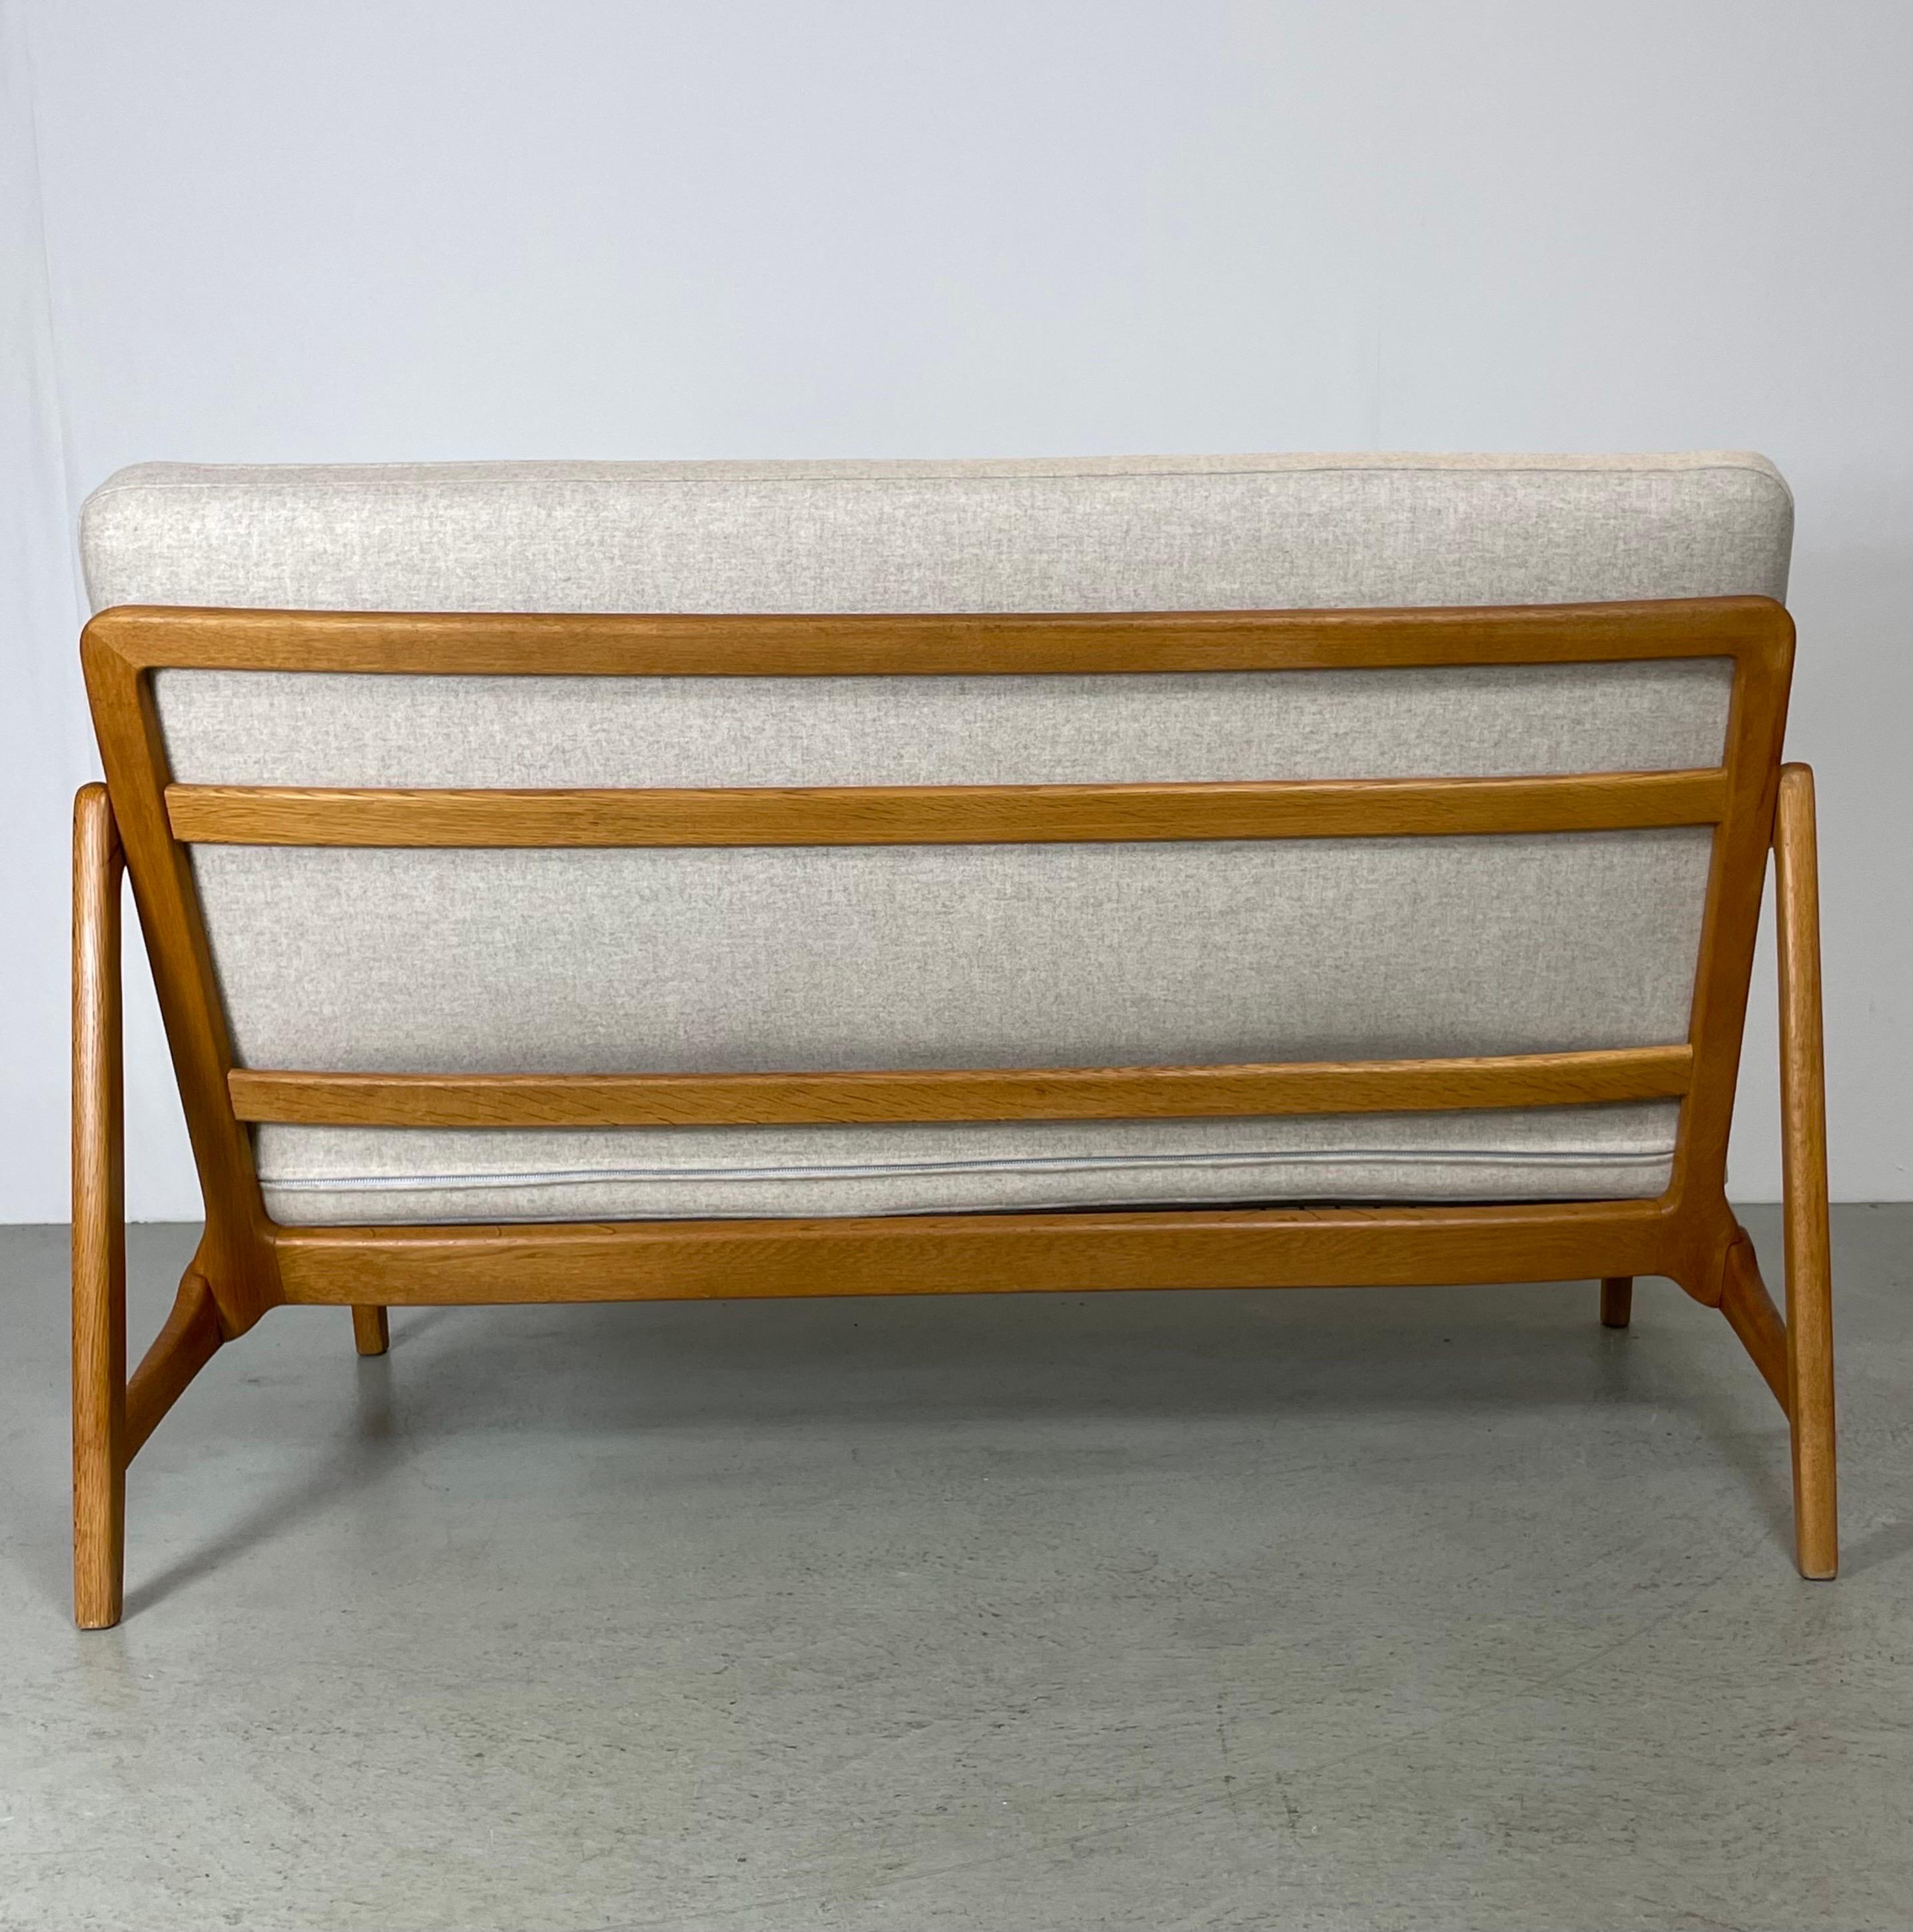 A comfortable 2-seater sofa designed by Danish architects Tove & Edward Kindt-Larson. Made in Denmark by France & Son during the 1950's. This model features a compact size with a wooden frame in oak and teak details on the armrests. It is fitted